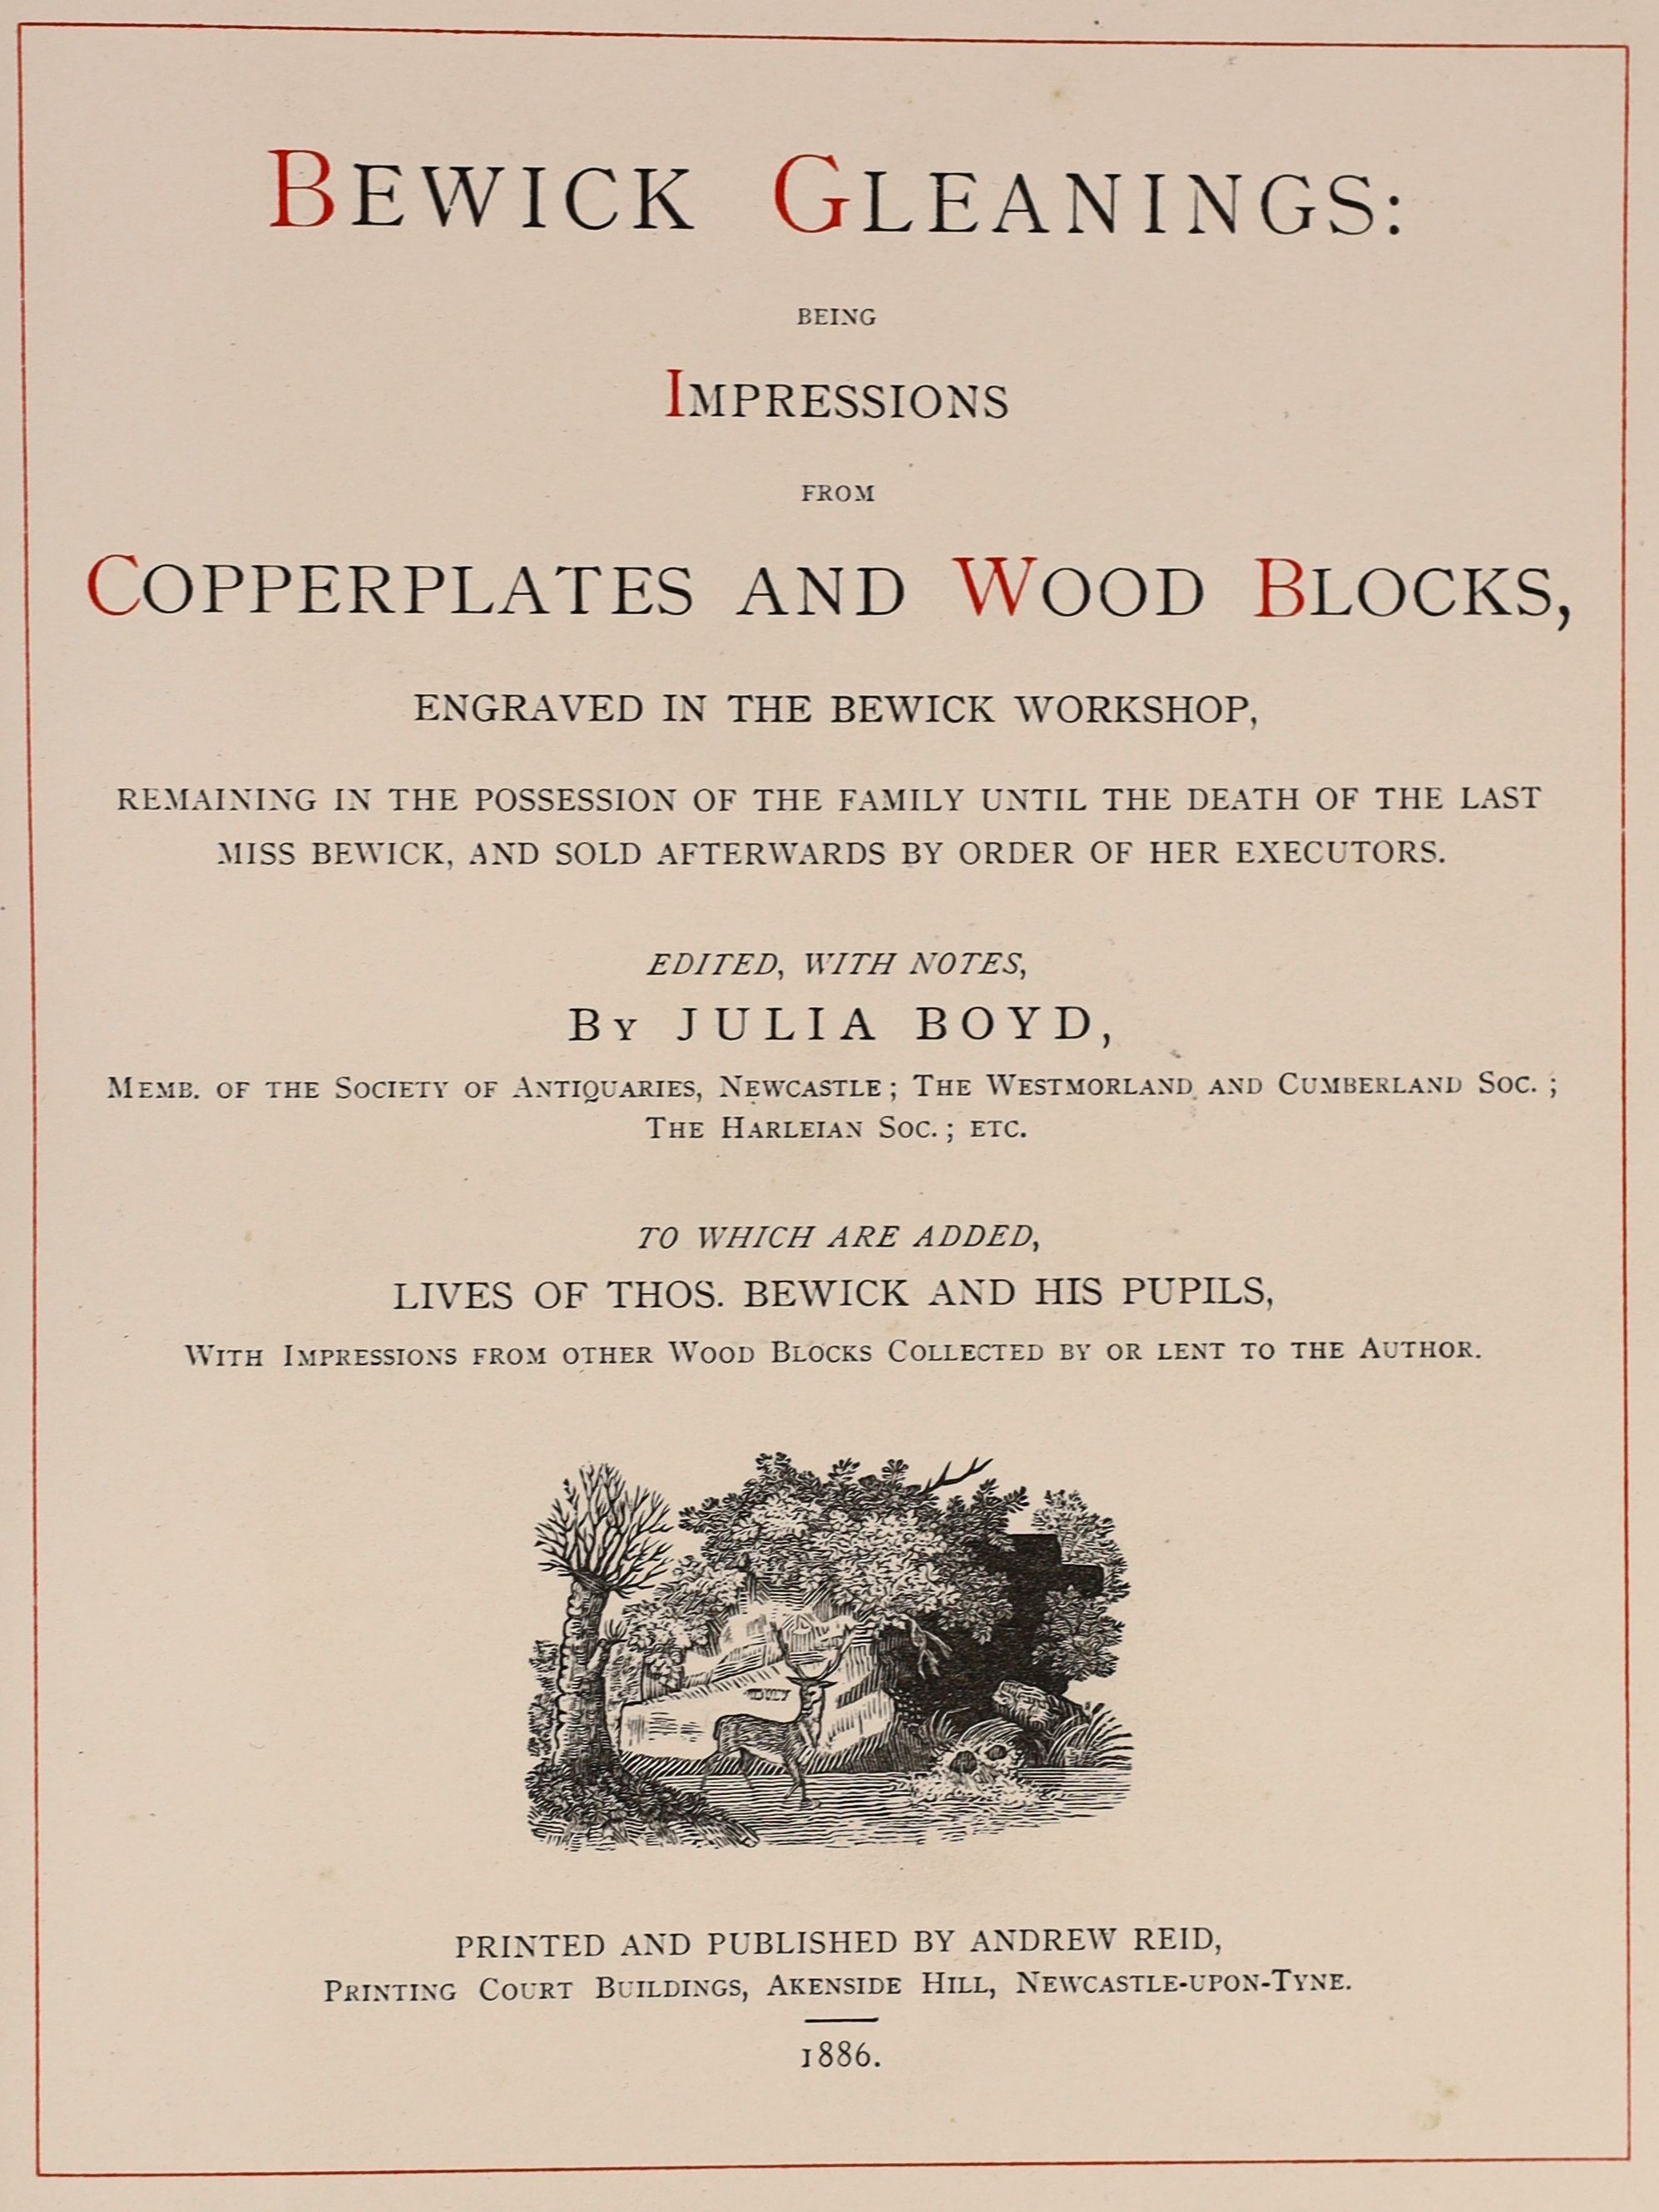 Bewick, Thomas - Bewick Gleanings, 2 parts in 1 vol. 4to, large paper copy, one of 200 signed by the editor, Julia Boyd, contemporary black morocco gilt, front board almost detached, rear board detached, Andrew Reid, New